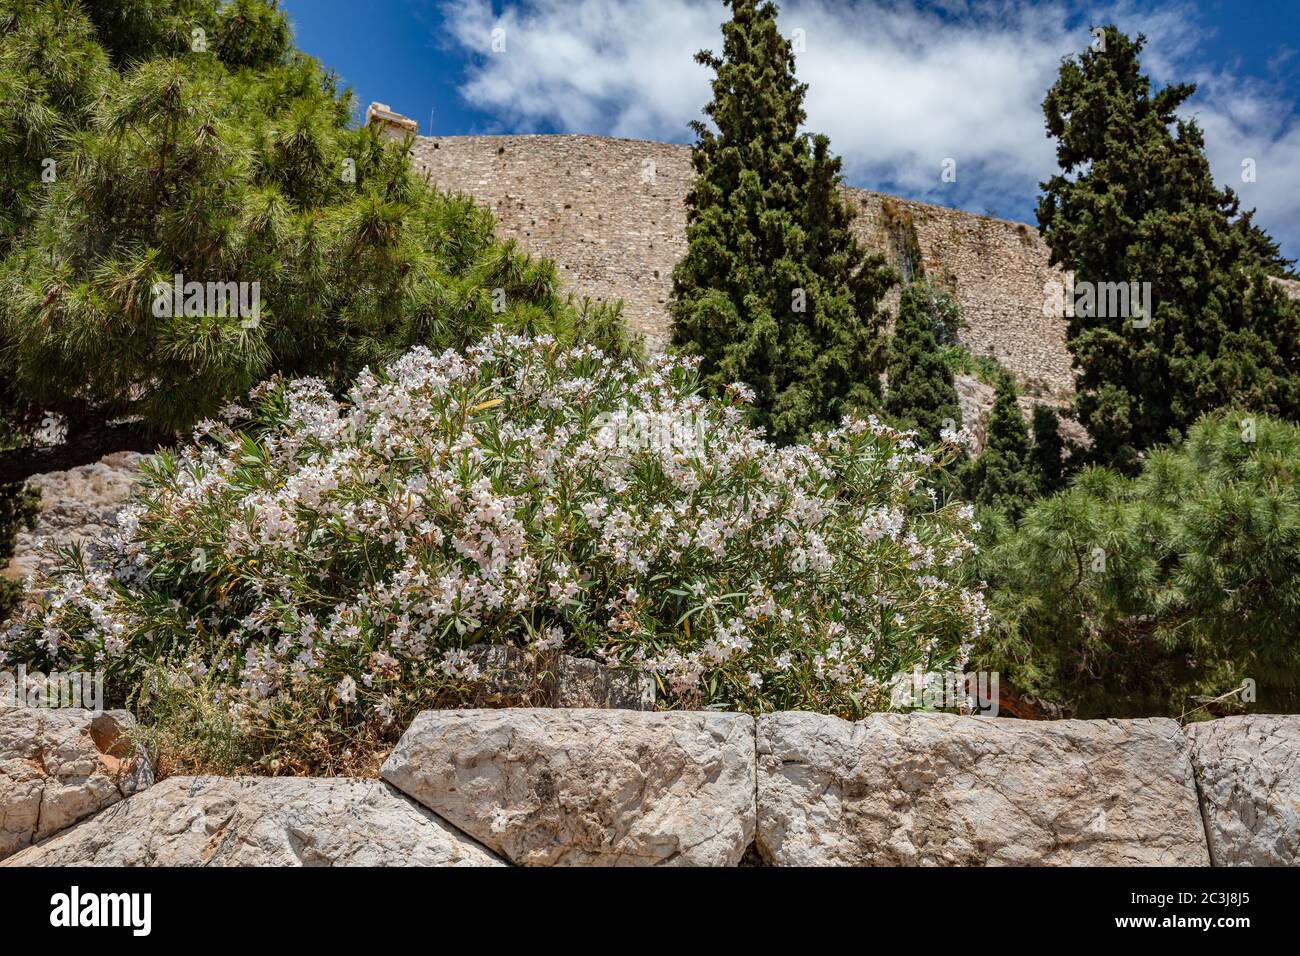 Under view of Parthenon, rock of Acropolis, Athens, Greece. White oleanders and pine trees surround the ancient monument. Greek blue sky background. Stock Photo